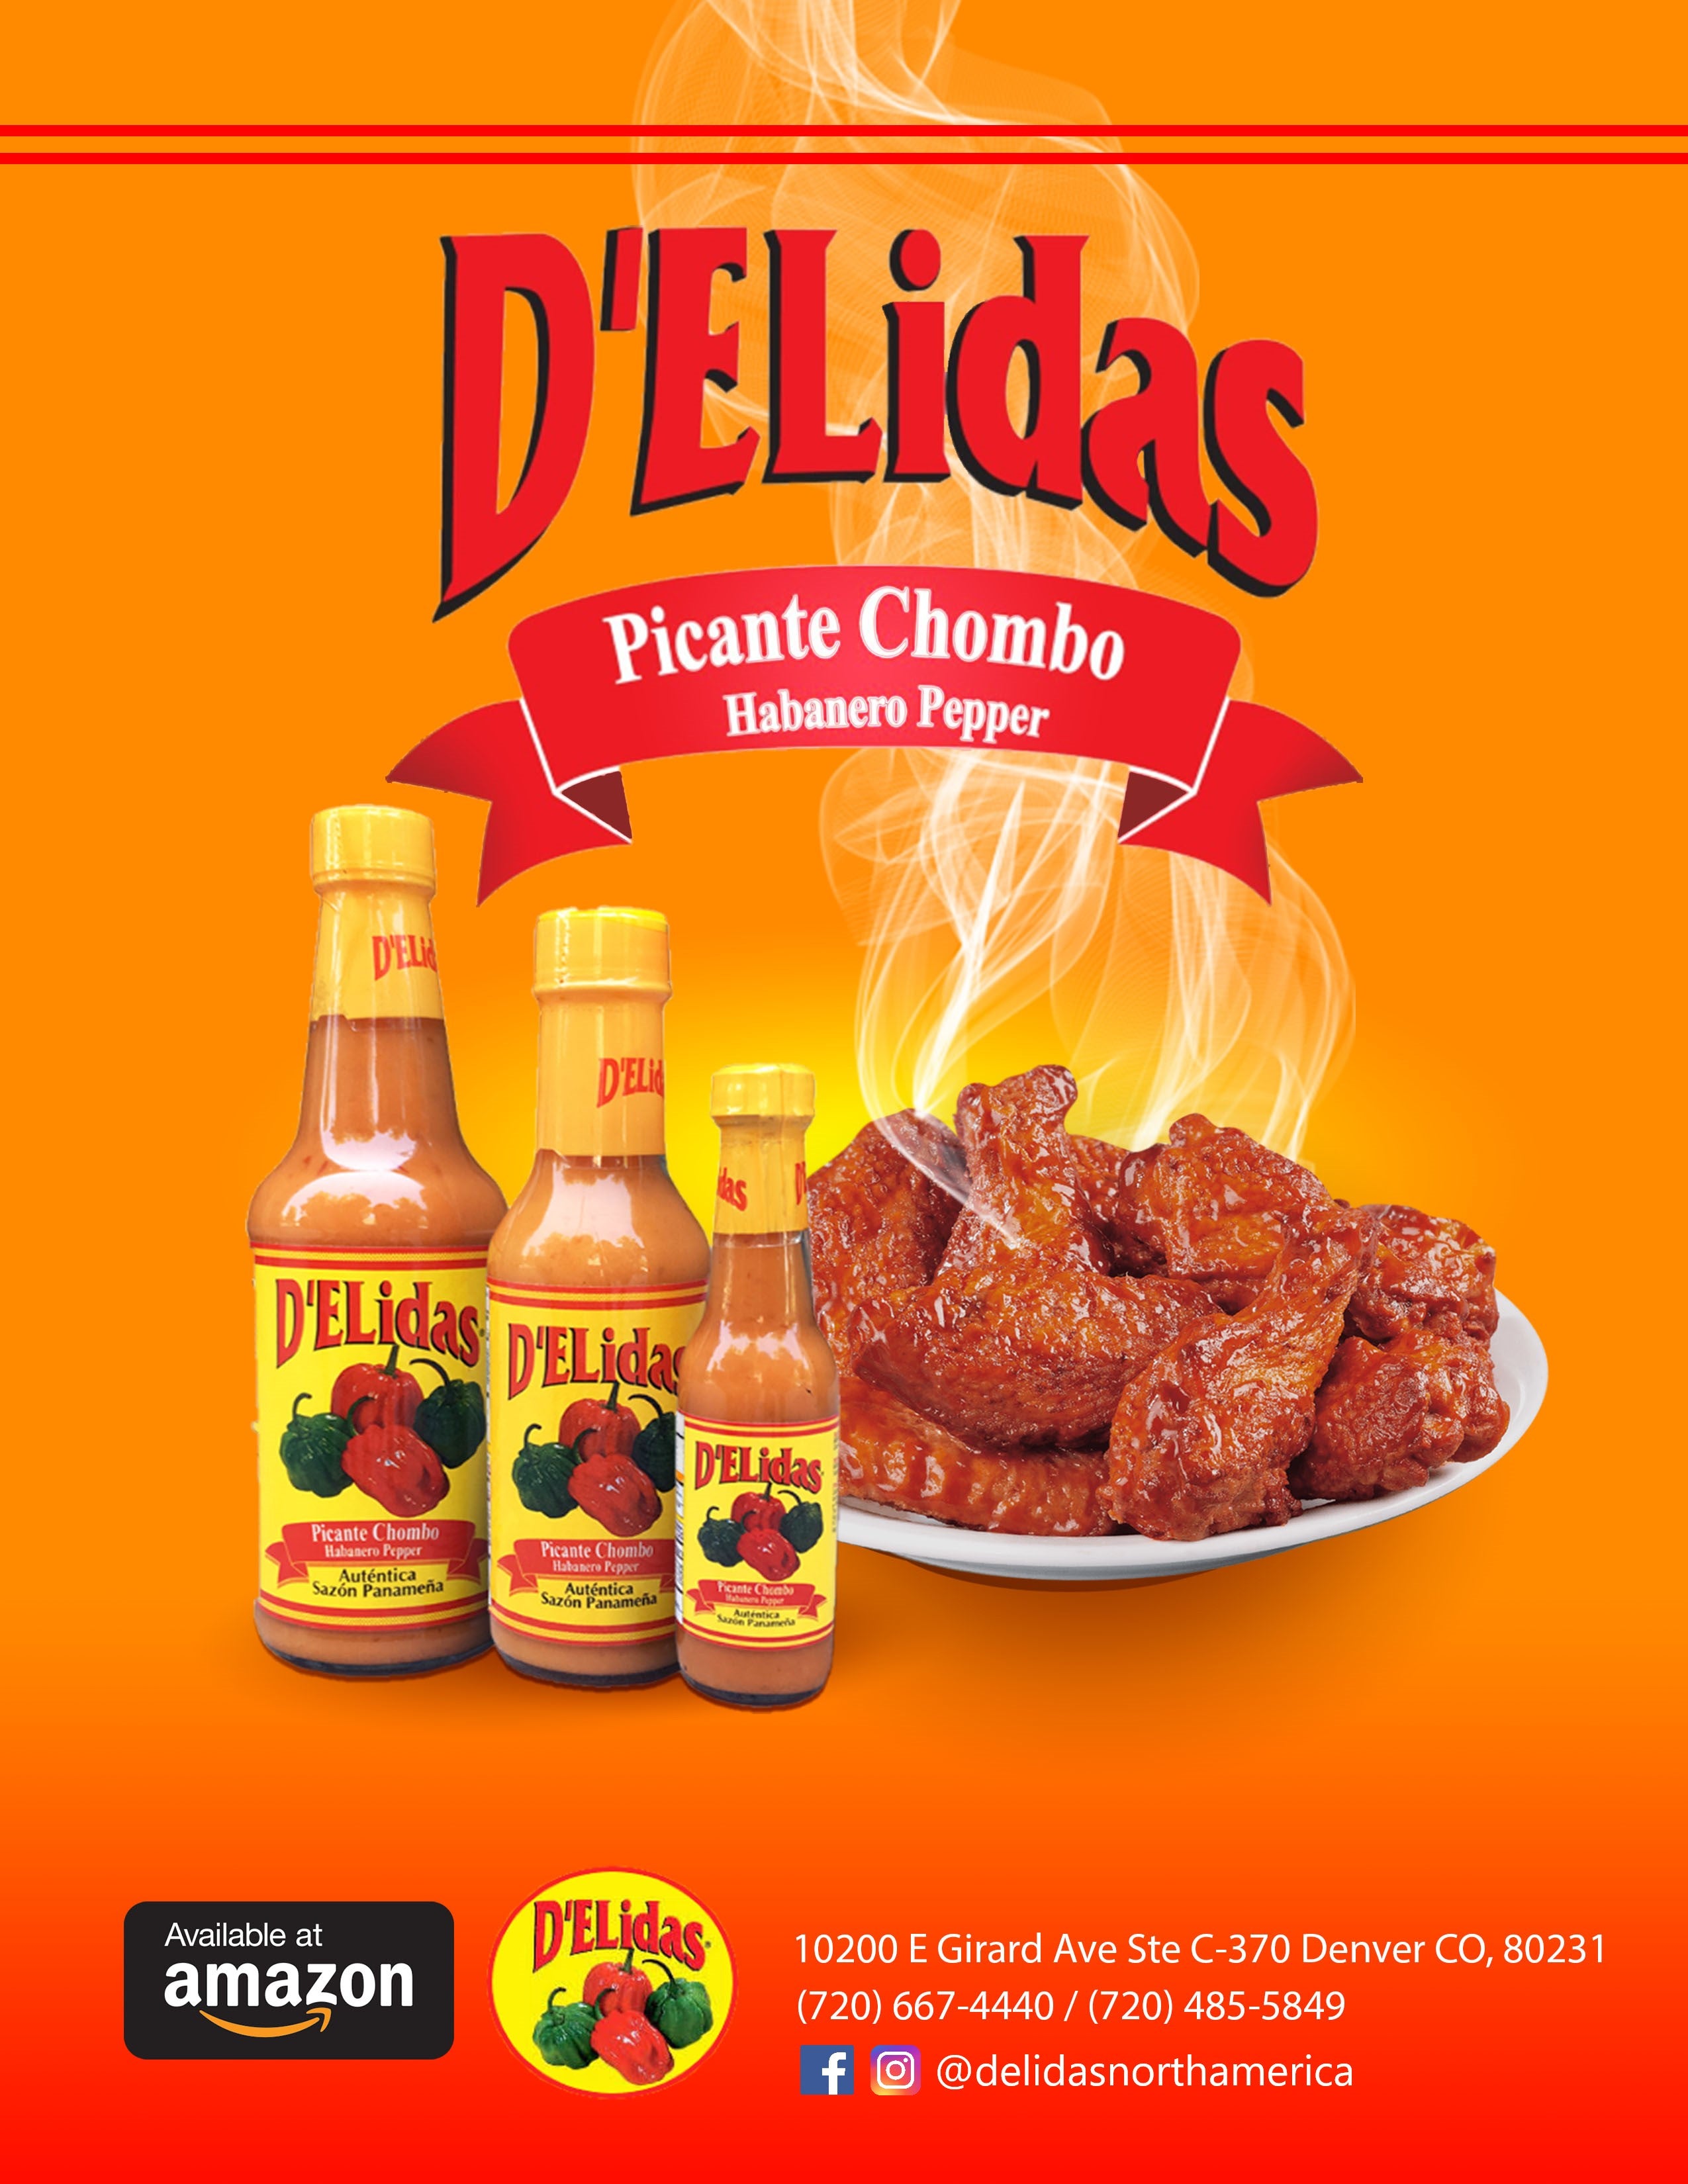 D'ELIDAS Hot Sauce Chombo Habanero Pepper Picante ALL NATURAL, (5oz) 3 PACK